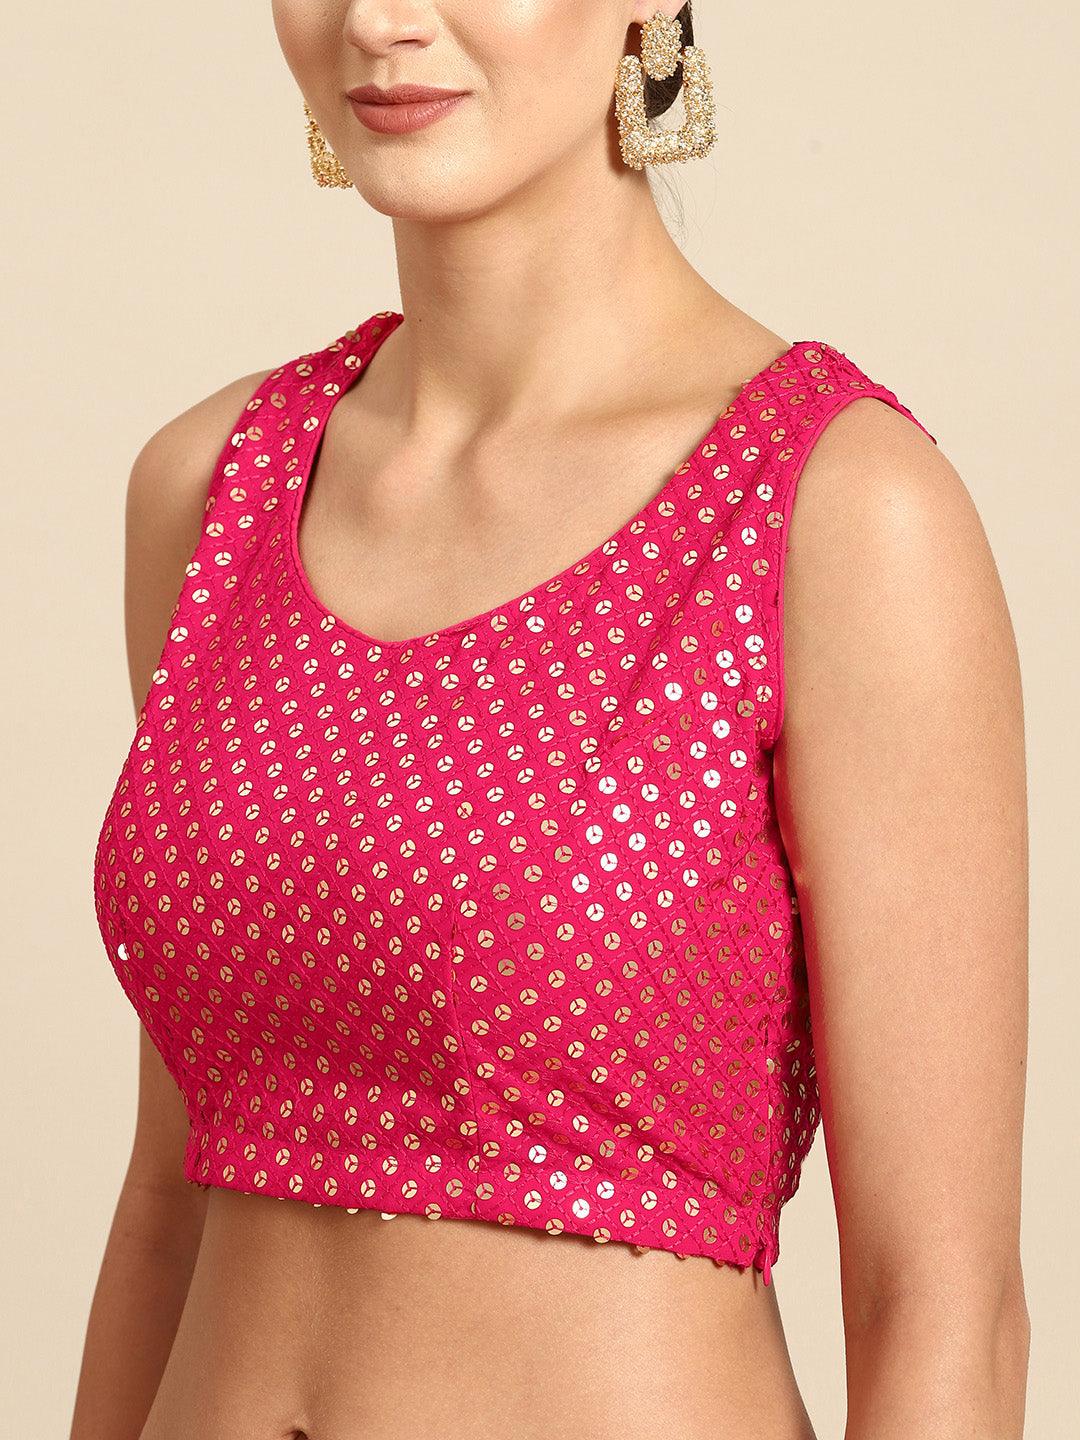 Pink Embellished Georgette Ready to Wear Saree